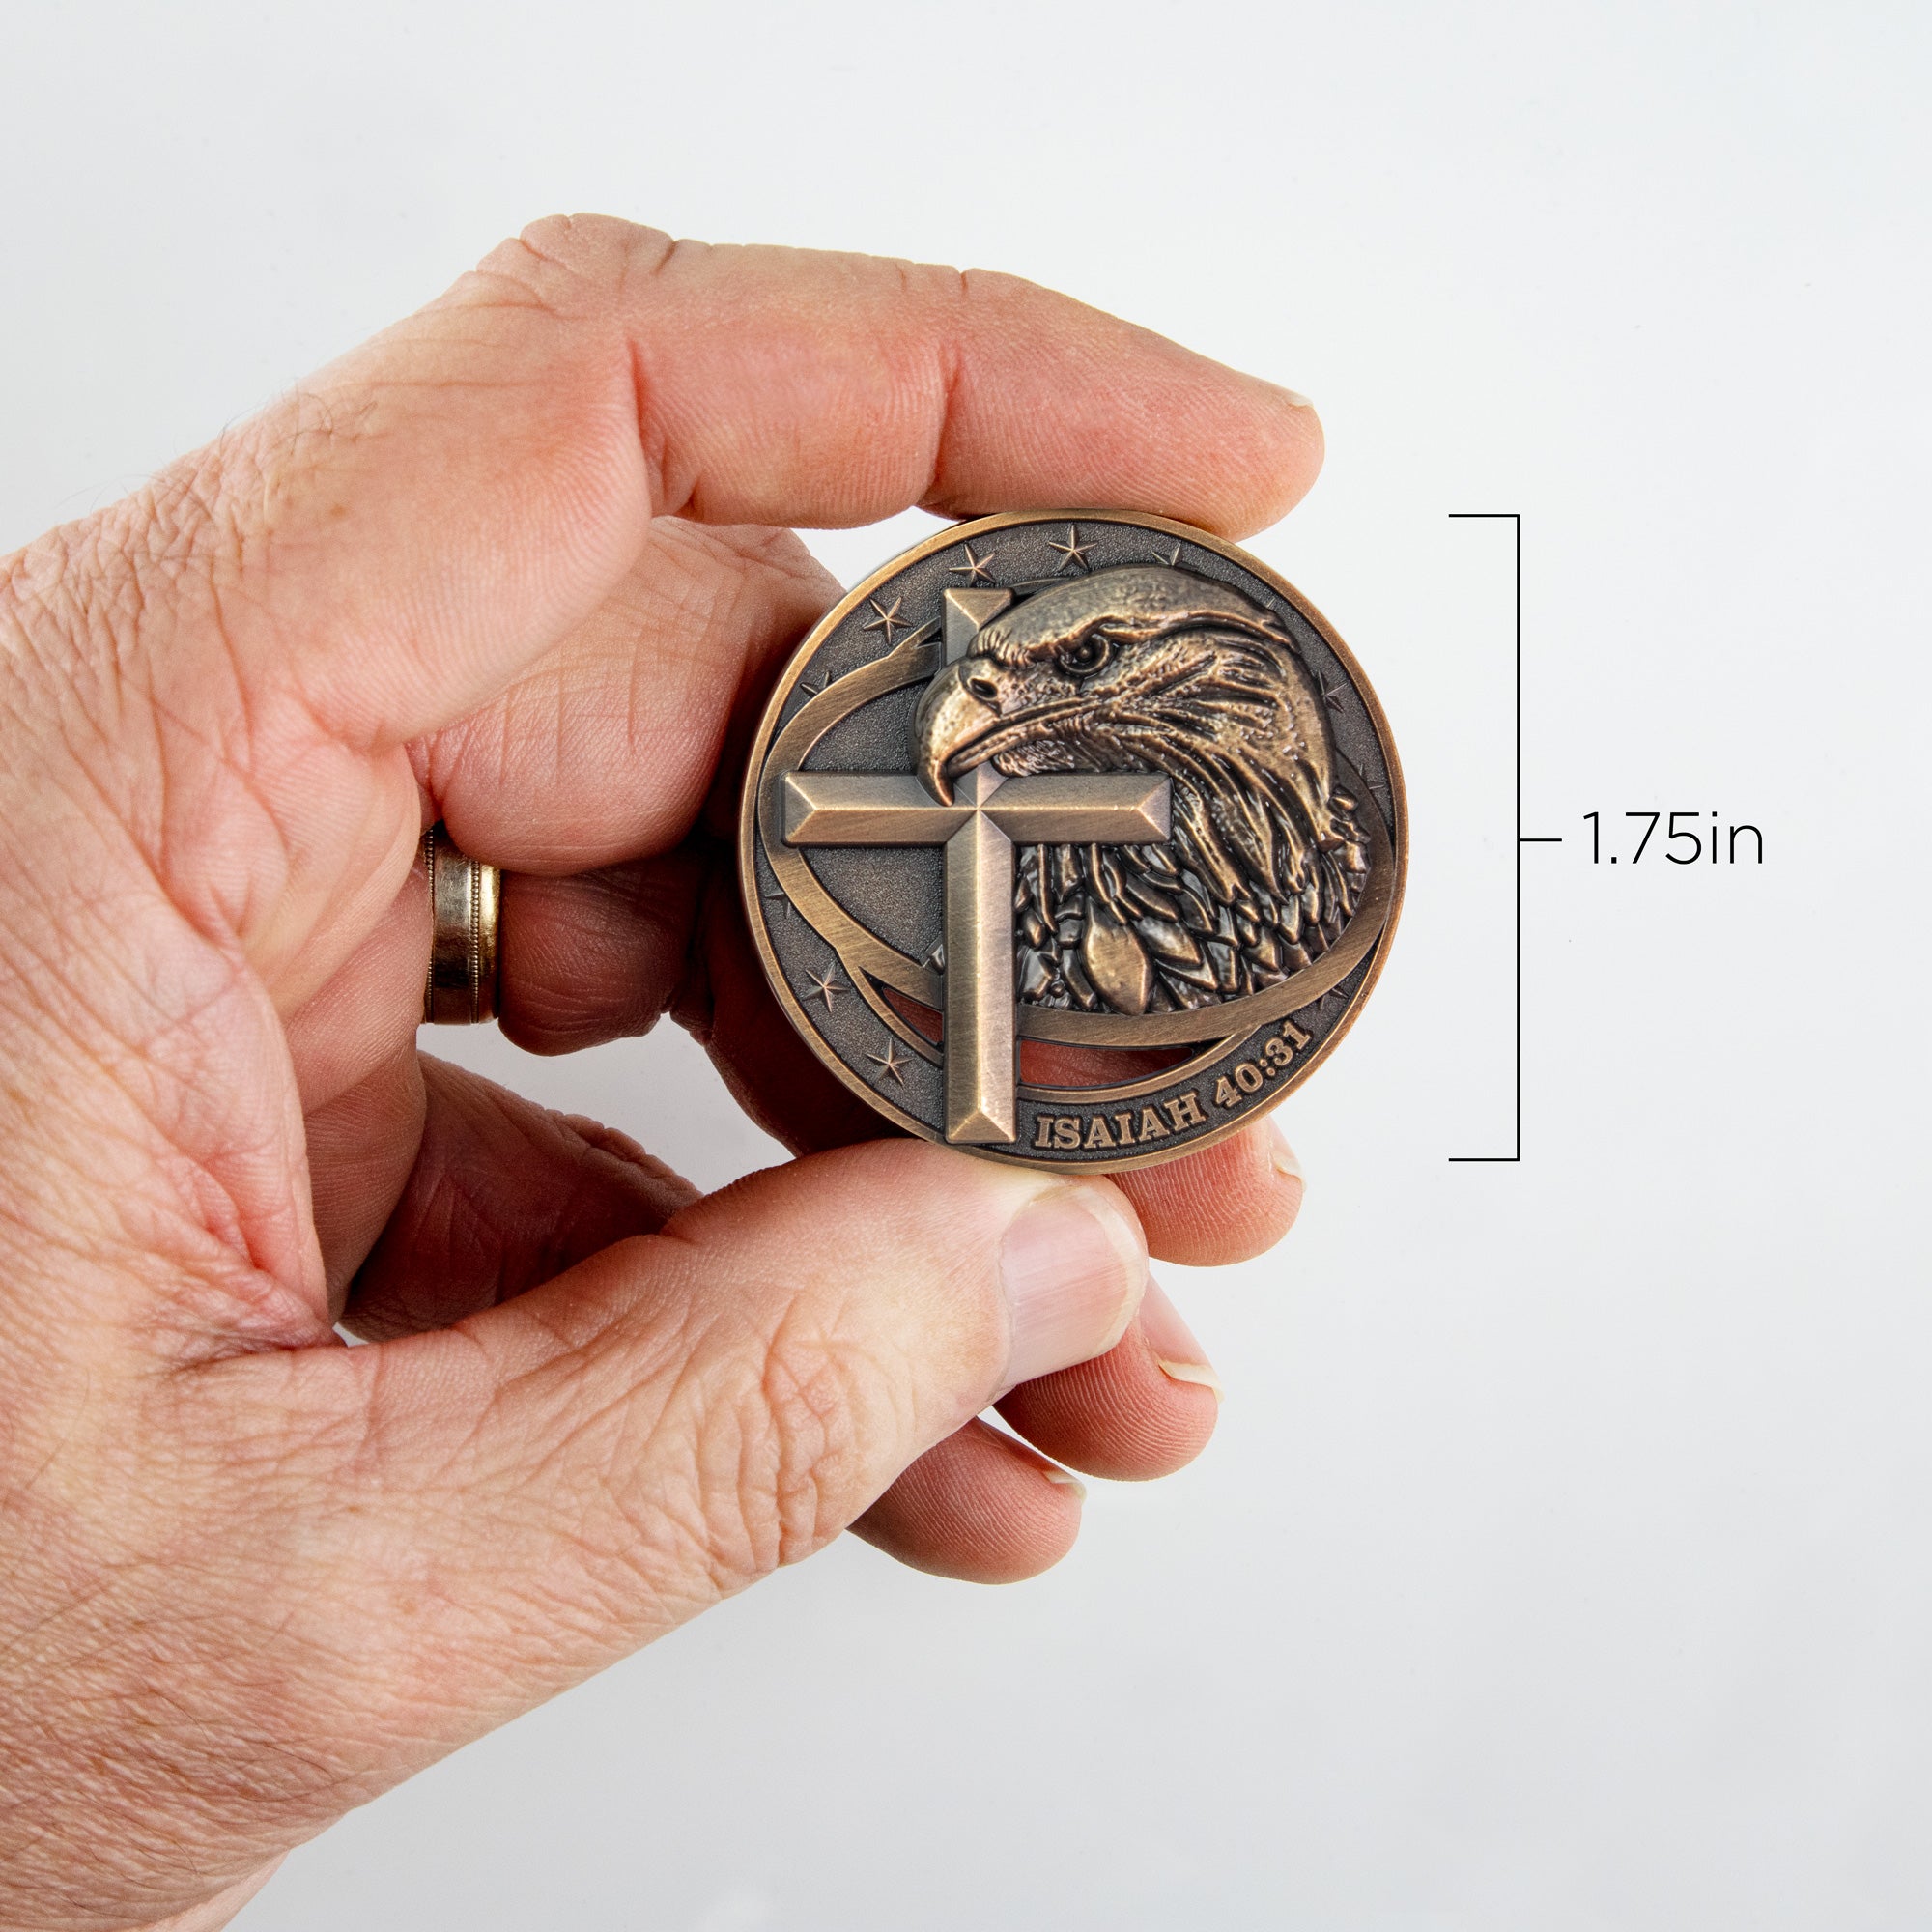 Eagle and Cross – Isaiah 40:31 Challenge Coin